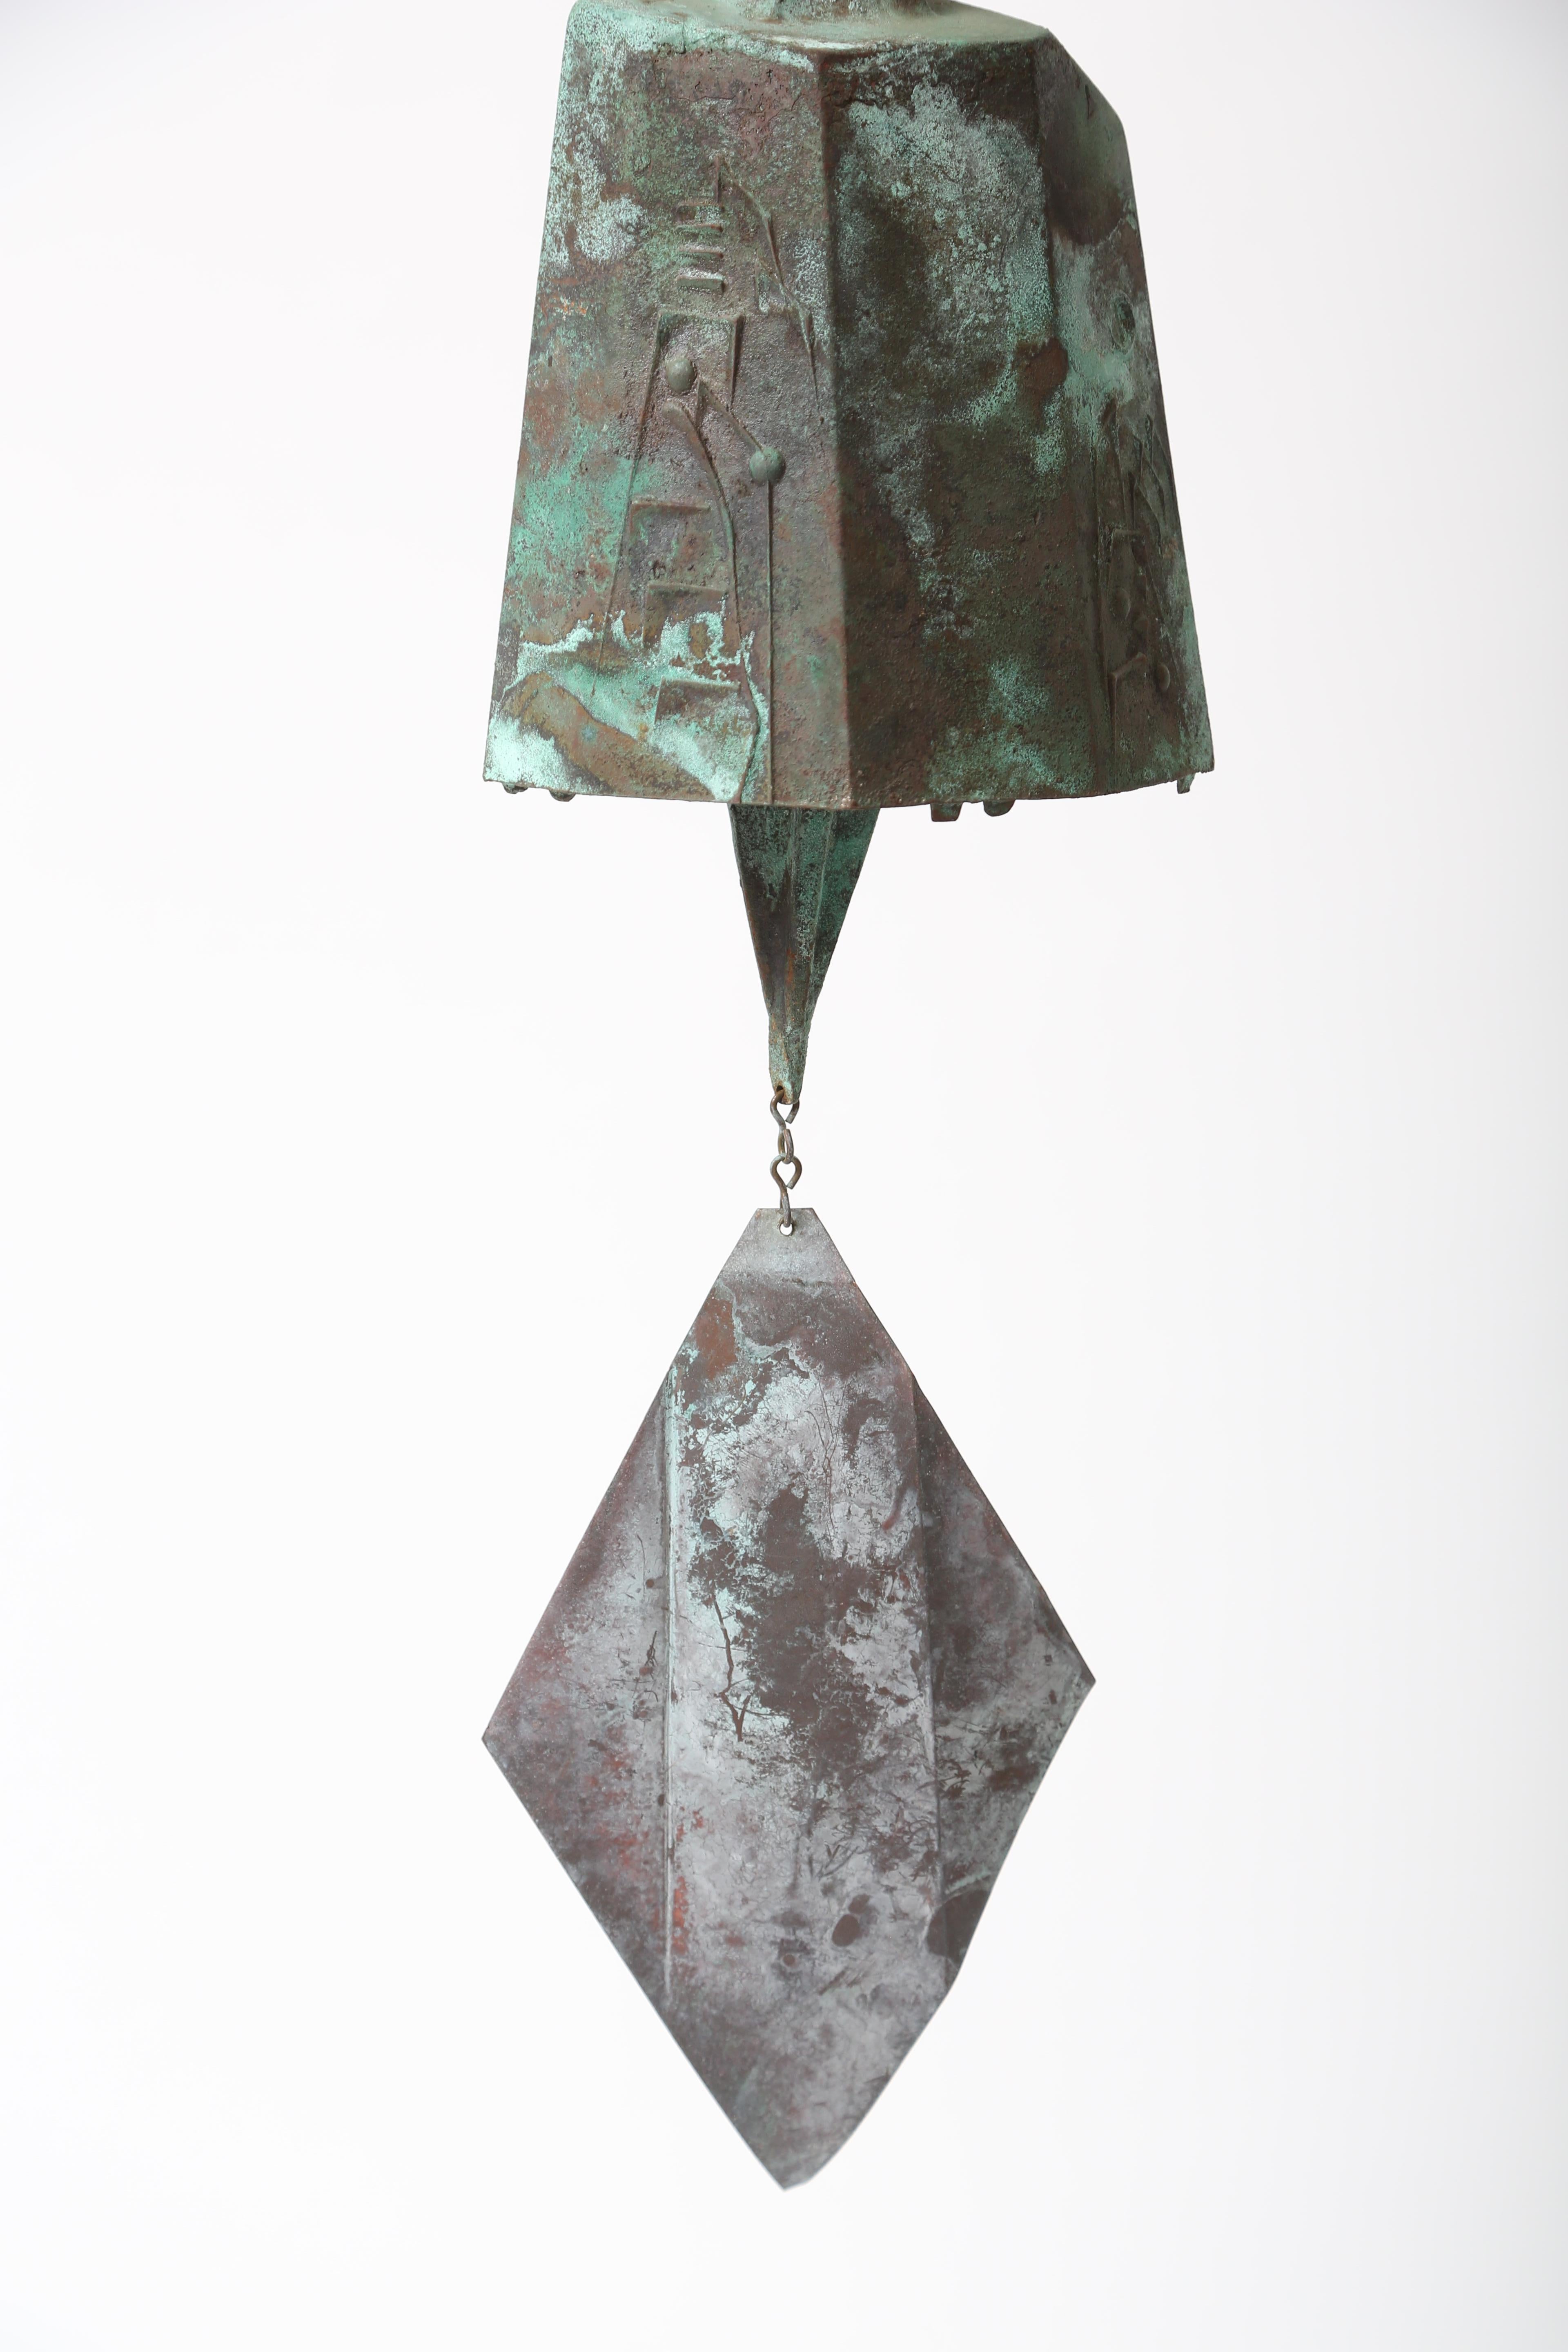 American Large Paolo Soleri Wind Chime